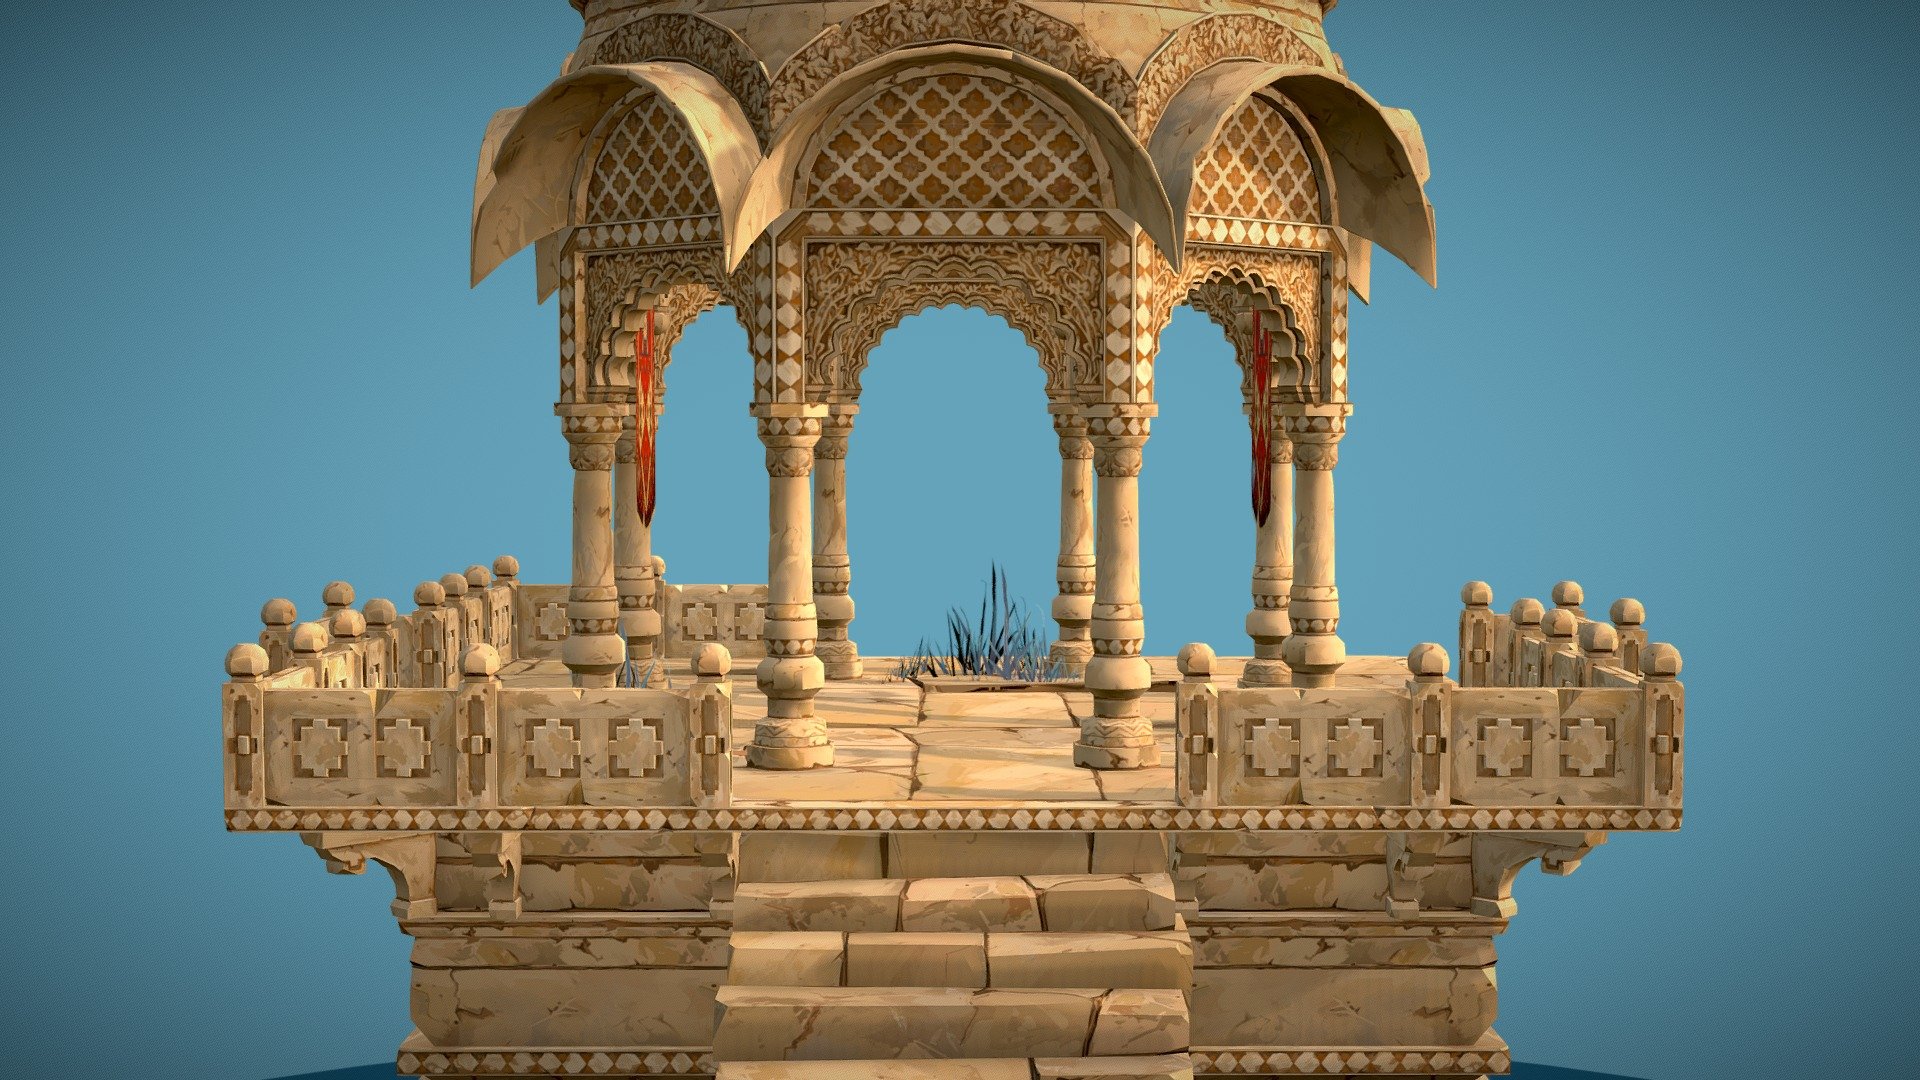 A diorama of an indian temple. Made in blender and renderer initially with Unity HDRP.

Go to artstation to see a breakdown &amp; nice shaders: https://www.artstation.com/artwork/L3ADlR

My Twitter thread explaining how I modeled and textured the stairs: https://twitter.com/CharlesBoury/status/1437720437505527808?s=20&amp;t=R2_ZZyALyD1XTB4-PX37YQ - Indian Temple - 3D model by Charles Boury (@boury.charles) 3d model